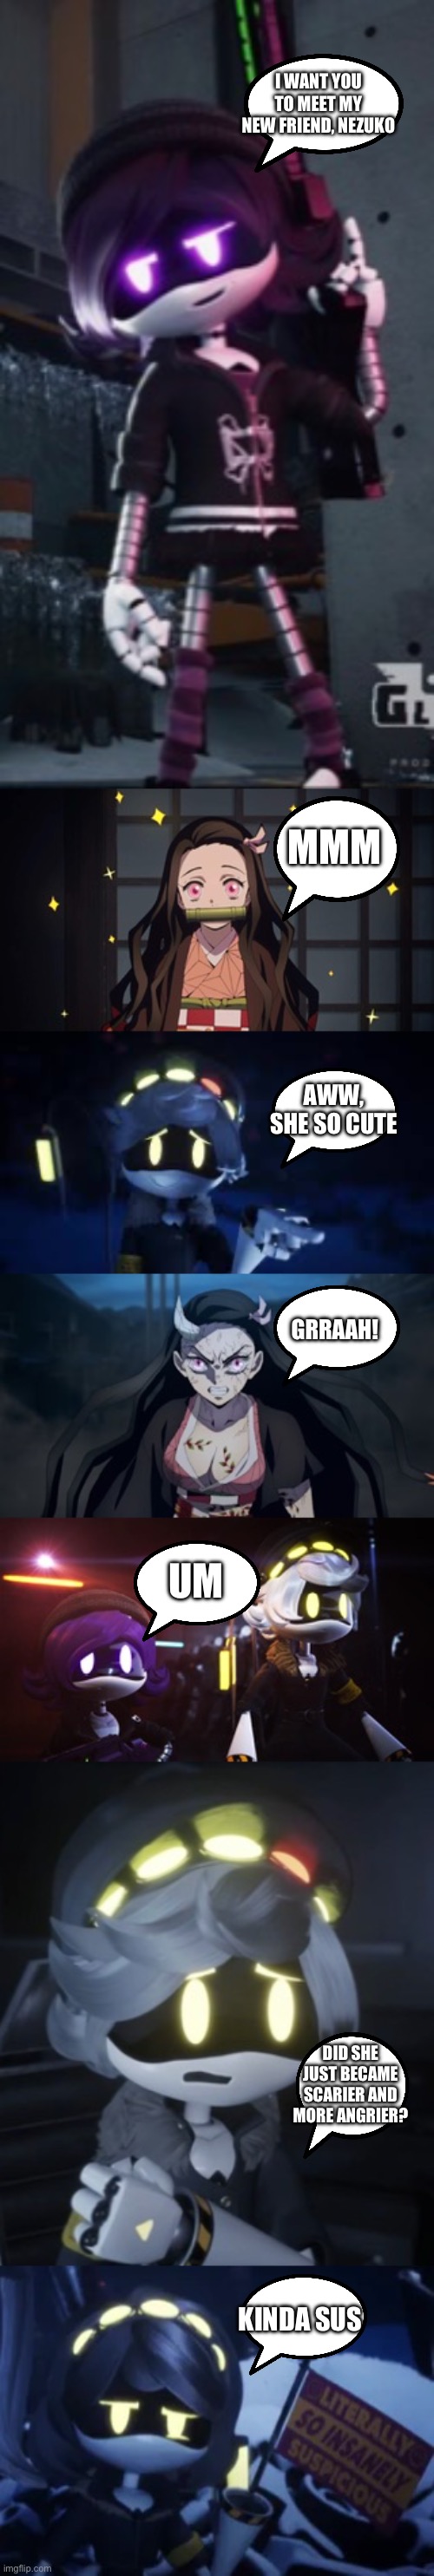 N meets Nezuko | I WANT YOU TO MEET MY NEW FRIEND, NEZUKO; MMM; AWW, SHE SO CUTE; GRRAAH! UM; DID SHE JUST BECAME SCARIER AND MORE ANGRIER? KINDA SUS | image tagged in murder drones,demon slayer | made w/ Imgflip meme maker